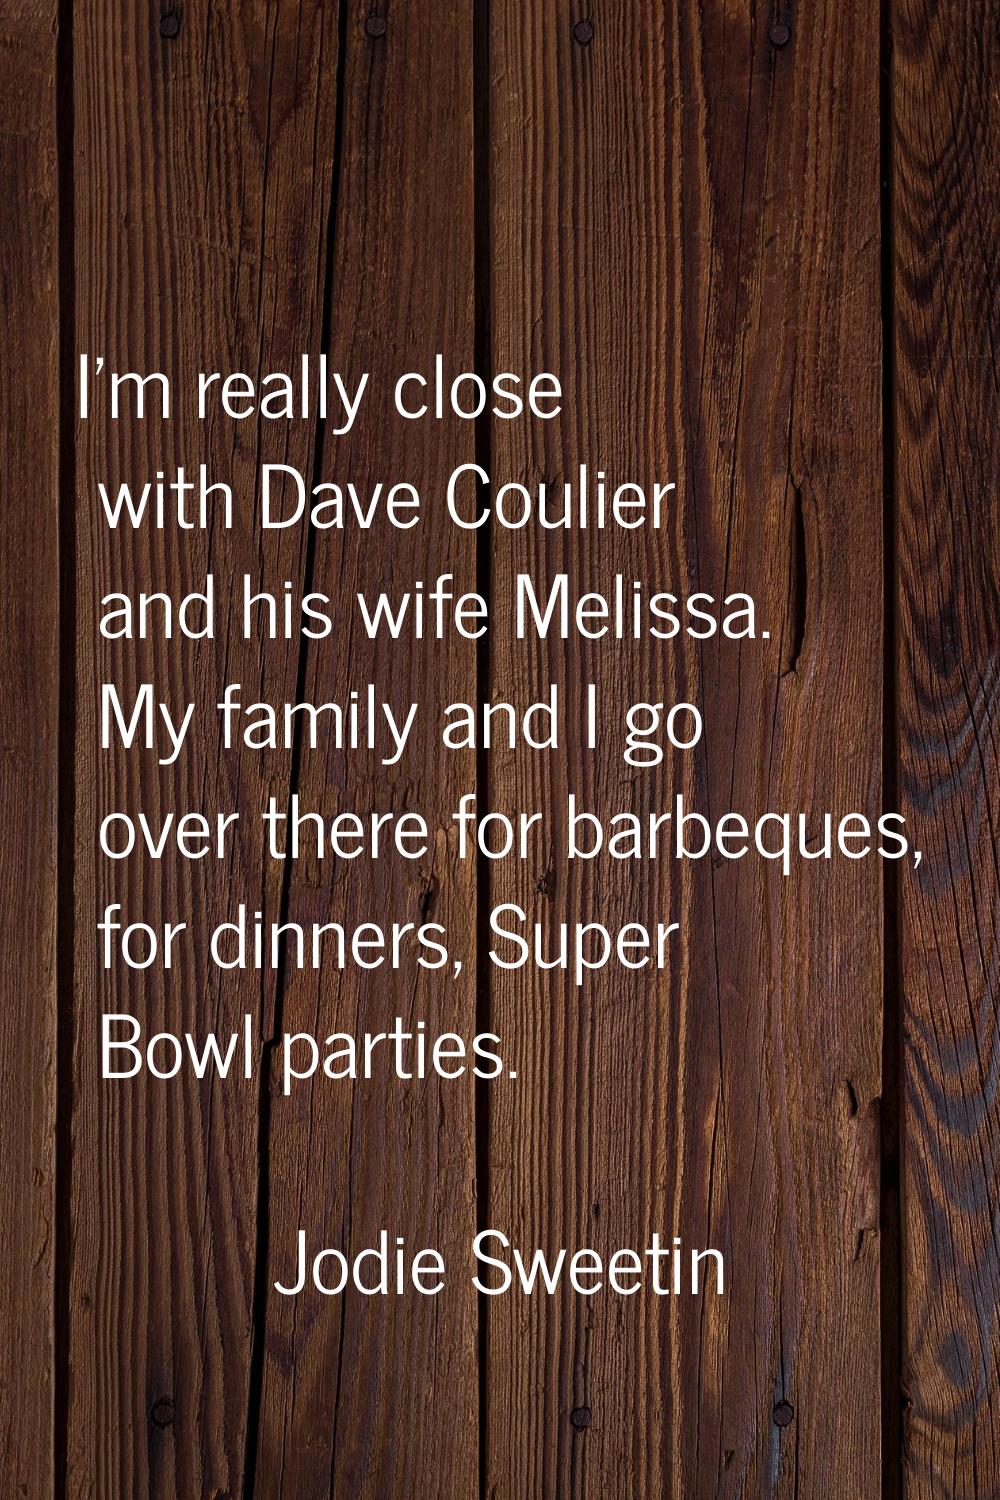 I'm really close with Dave Coulier and his wife Melissa. My family and I go over there for barbeque